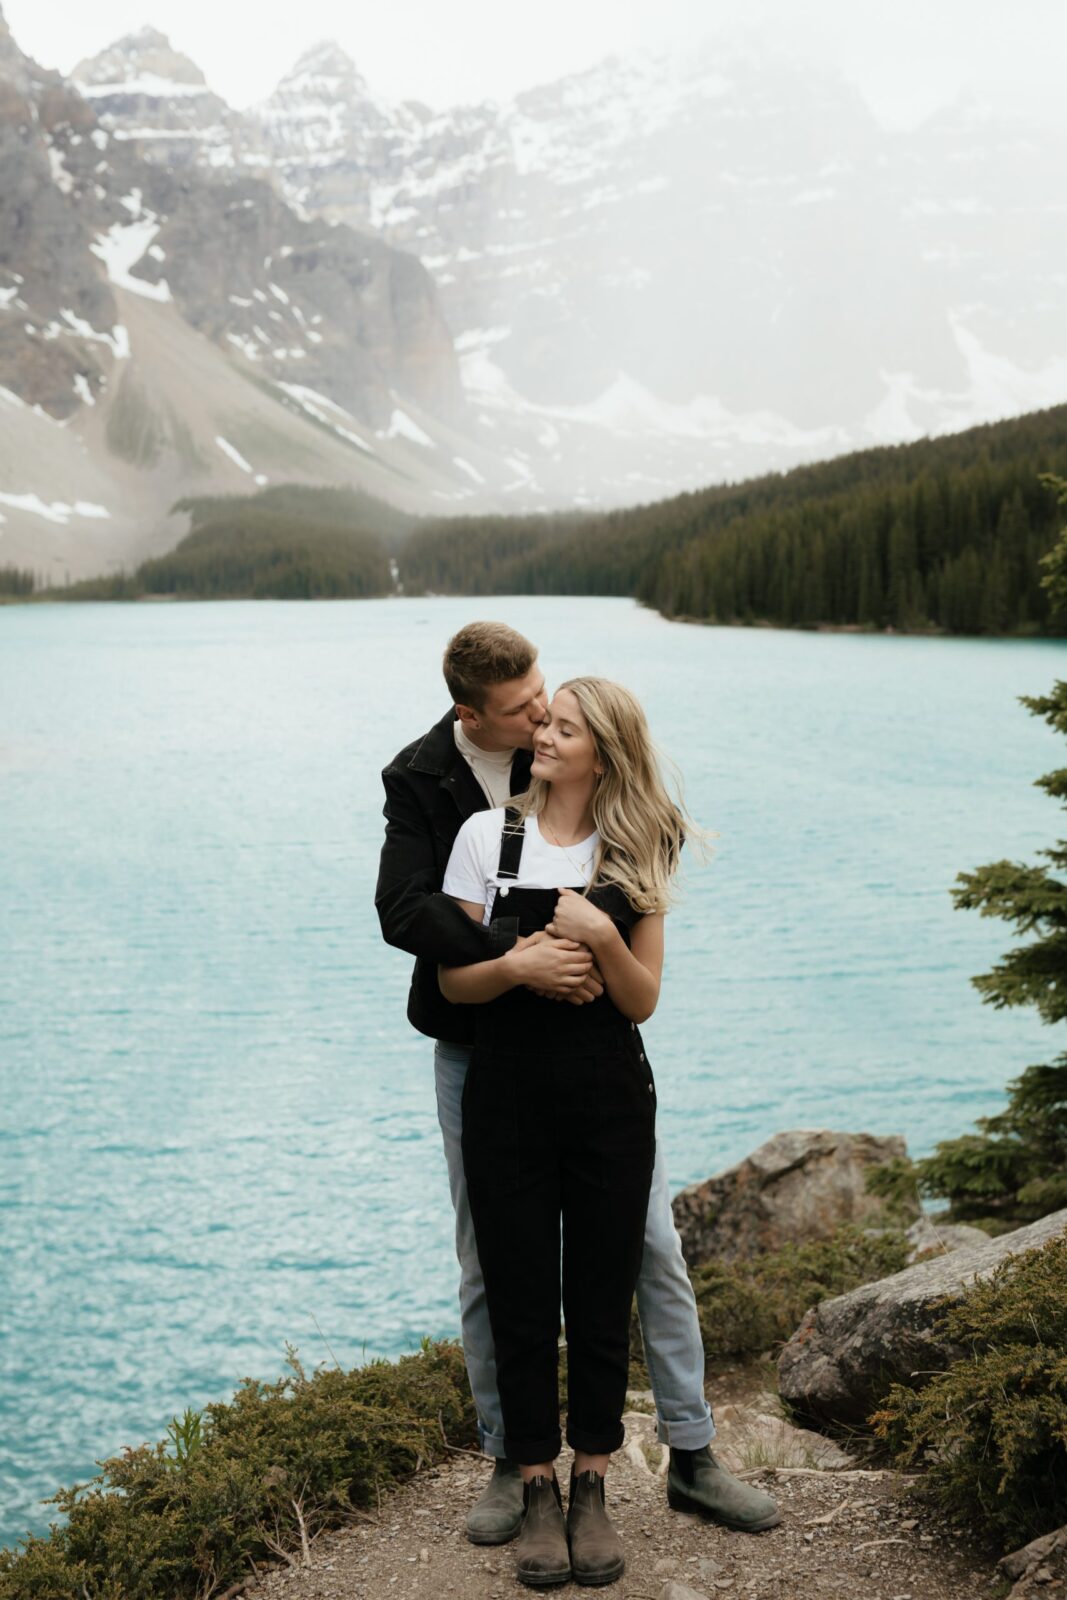 6 Tips All About Choosing Outfits For Your Engagement Session - Malorie Reiter featured on Bronte Bride